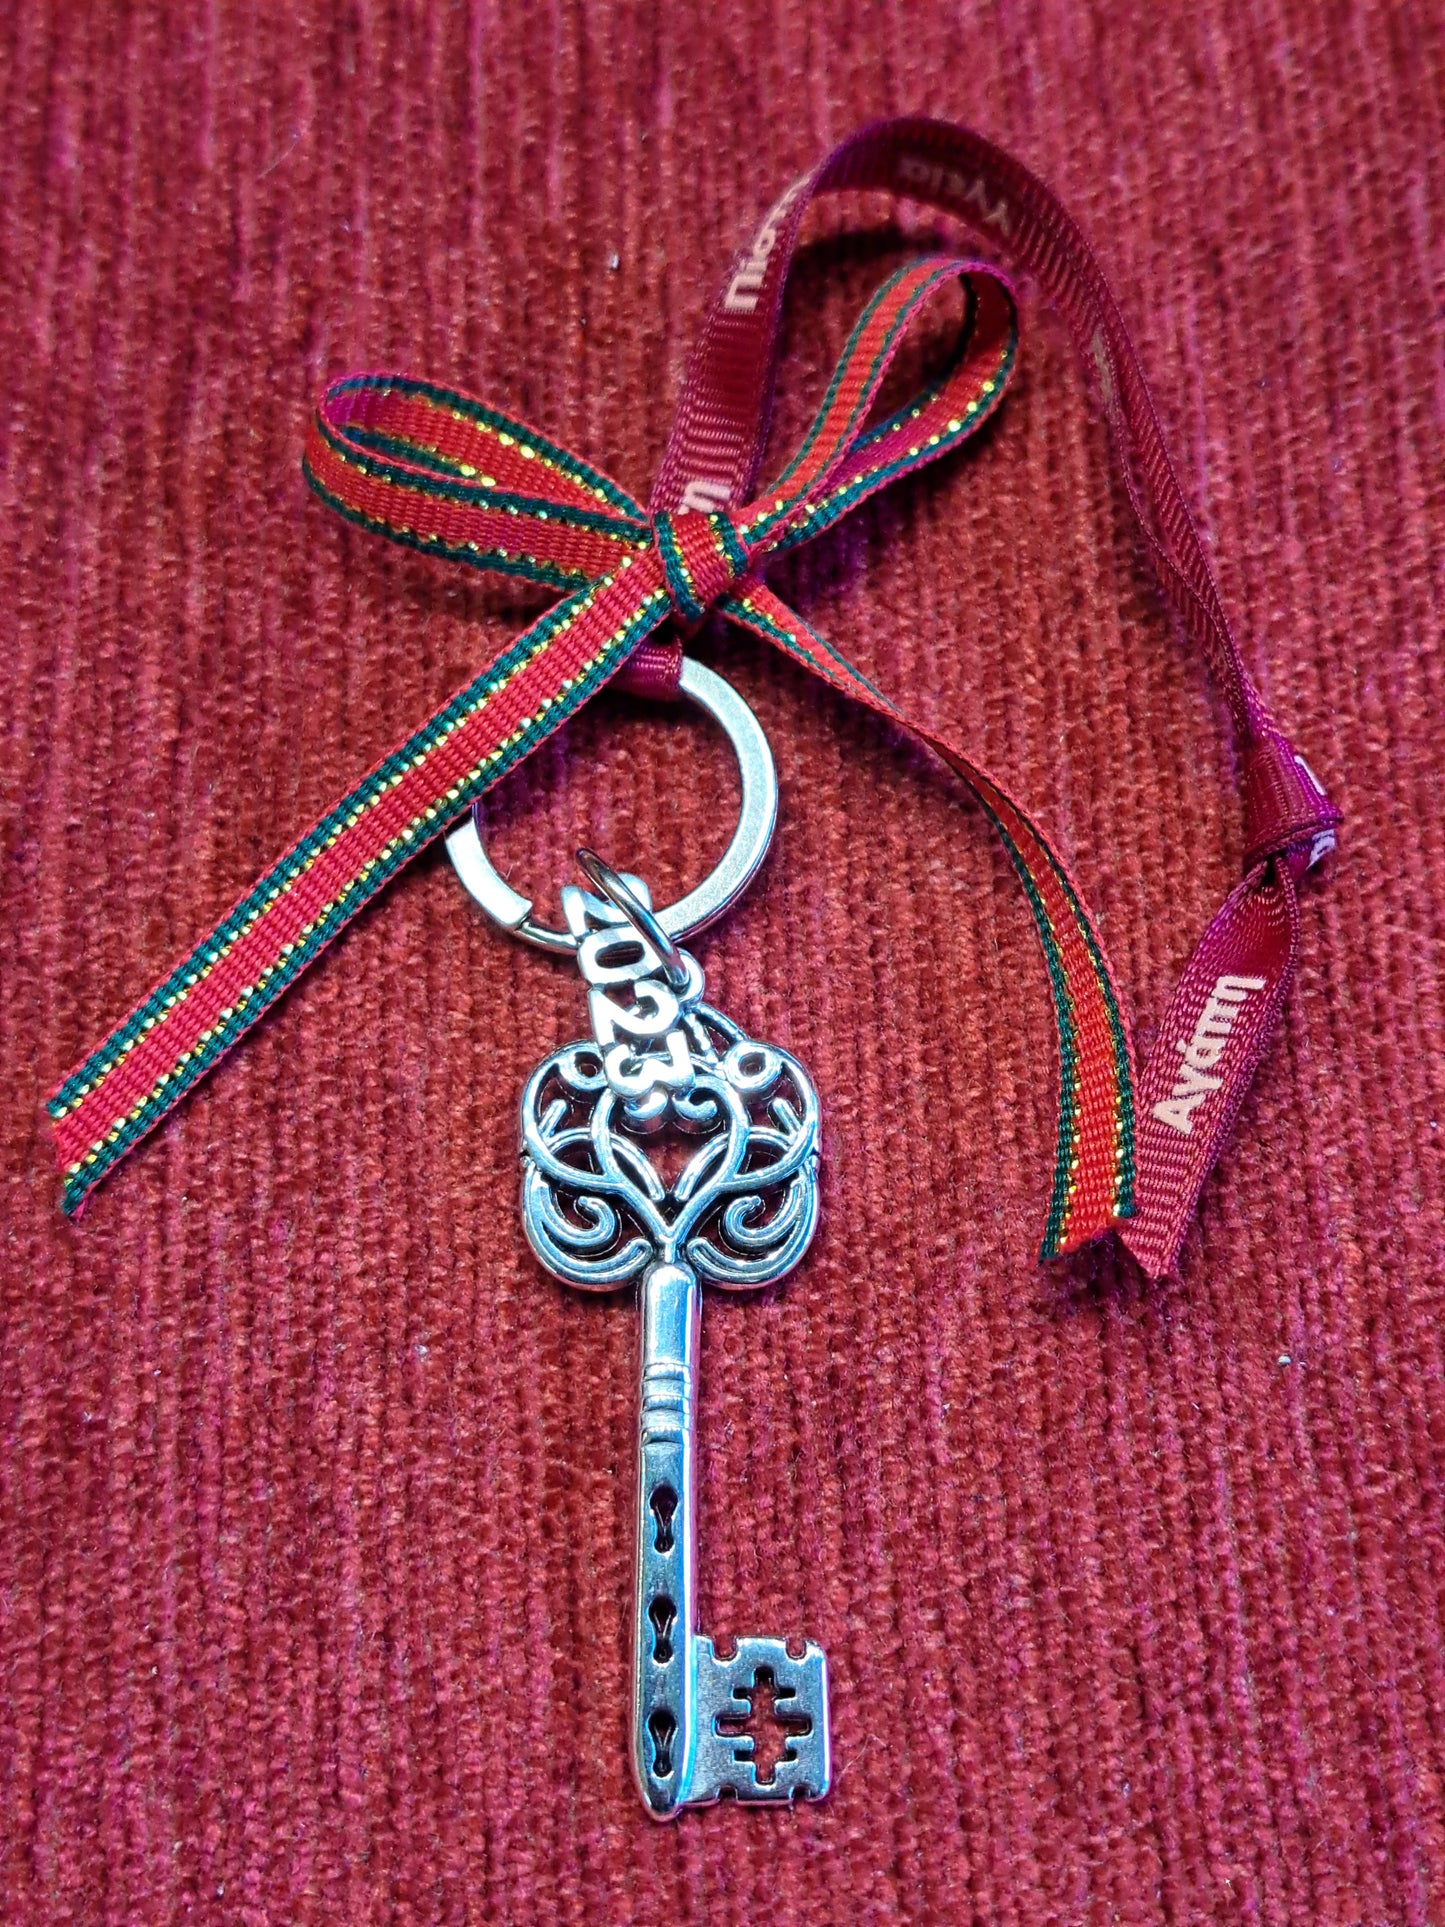 Antique key ,keychain for 2023